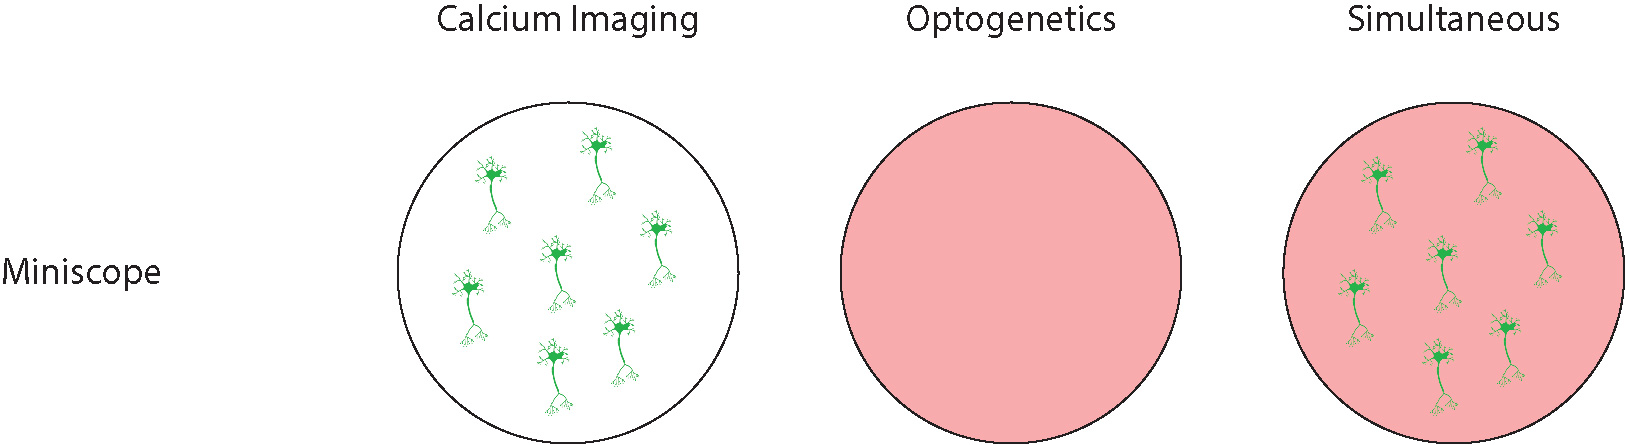 imaging and optogenetics resolution for miniscope